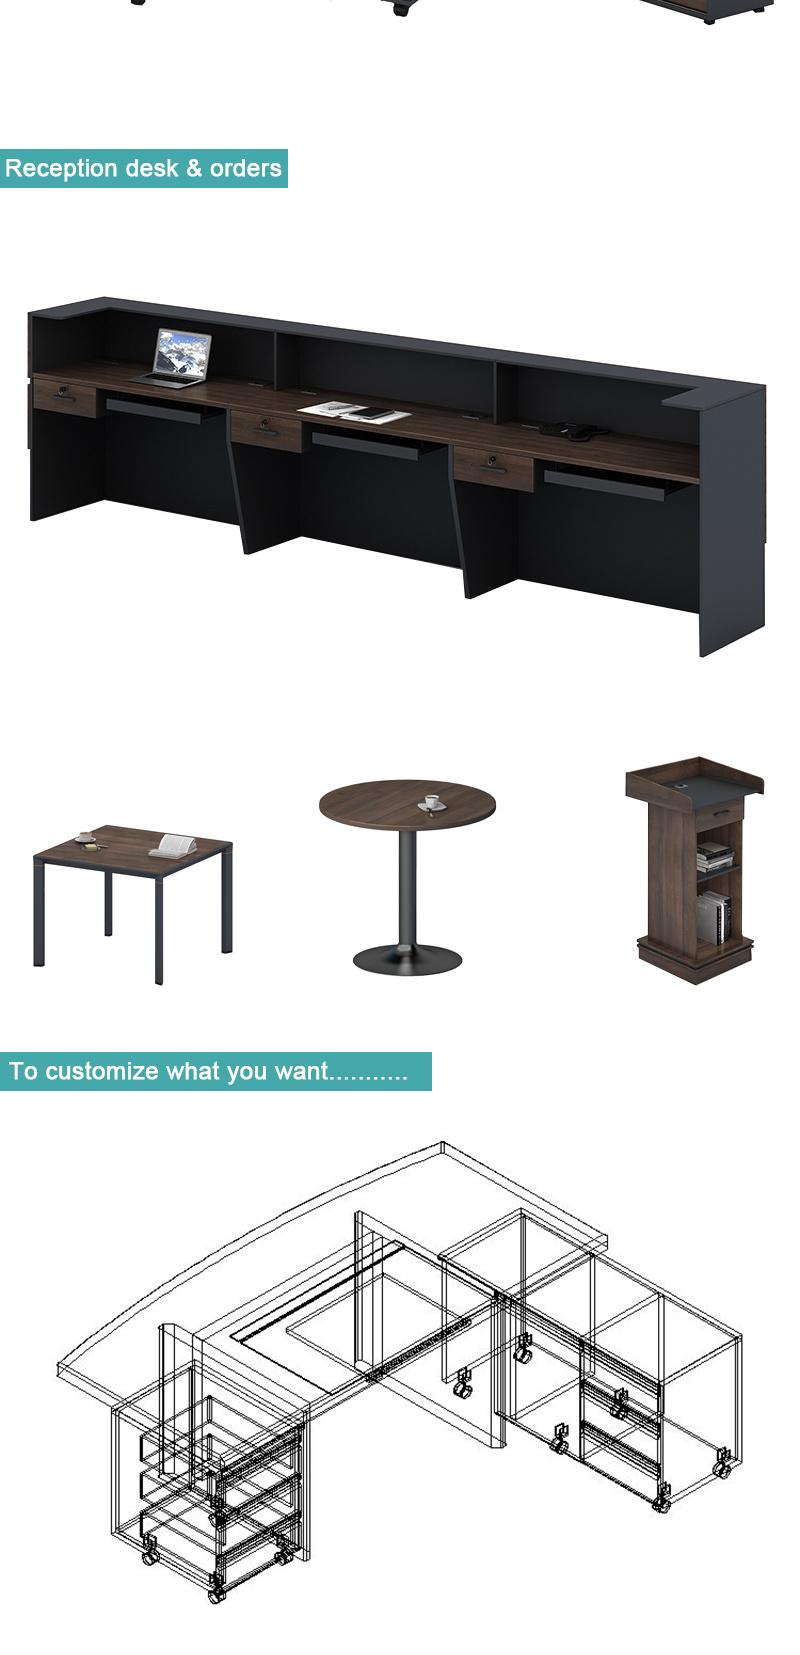 Wholesale Market Modern Wooden Office Furniture Council Boardroom Negotiating Meeting Room Conference Table